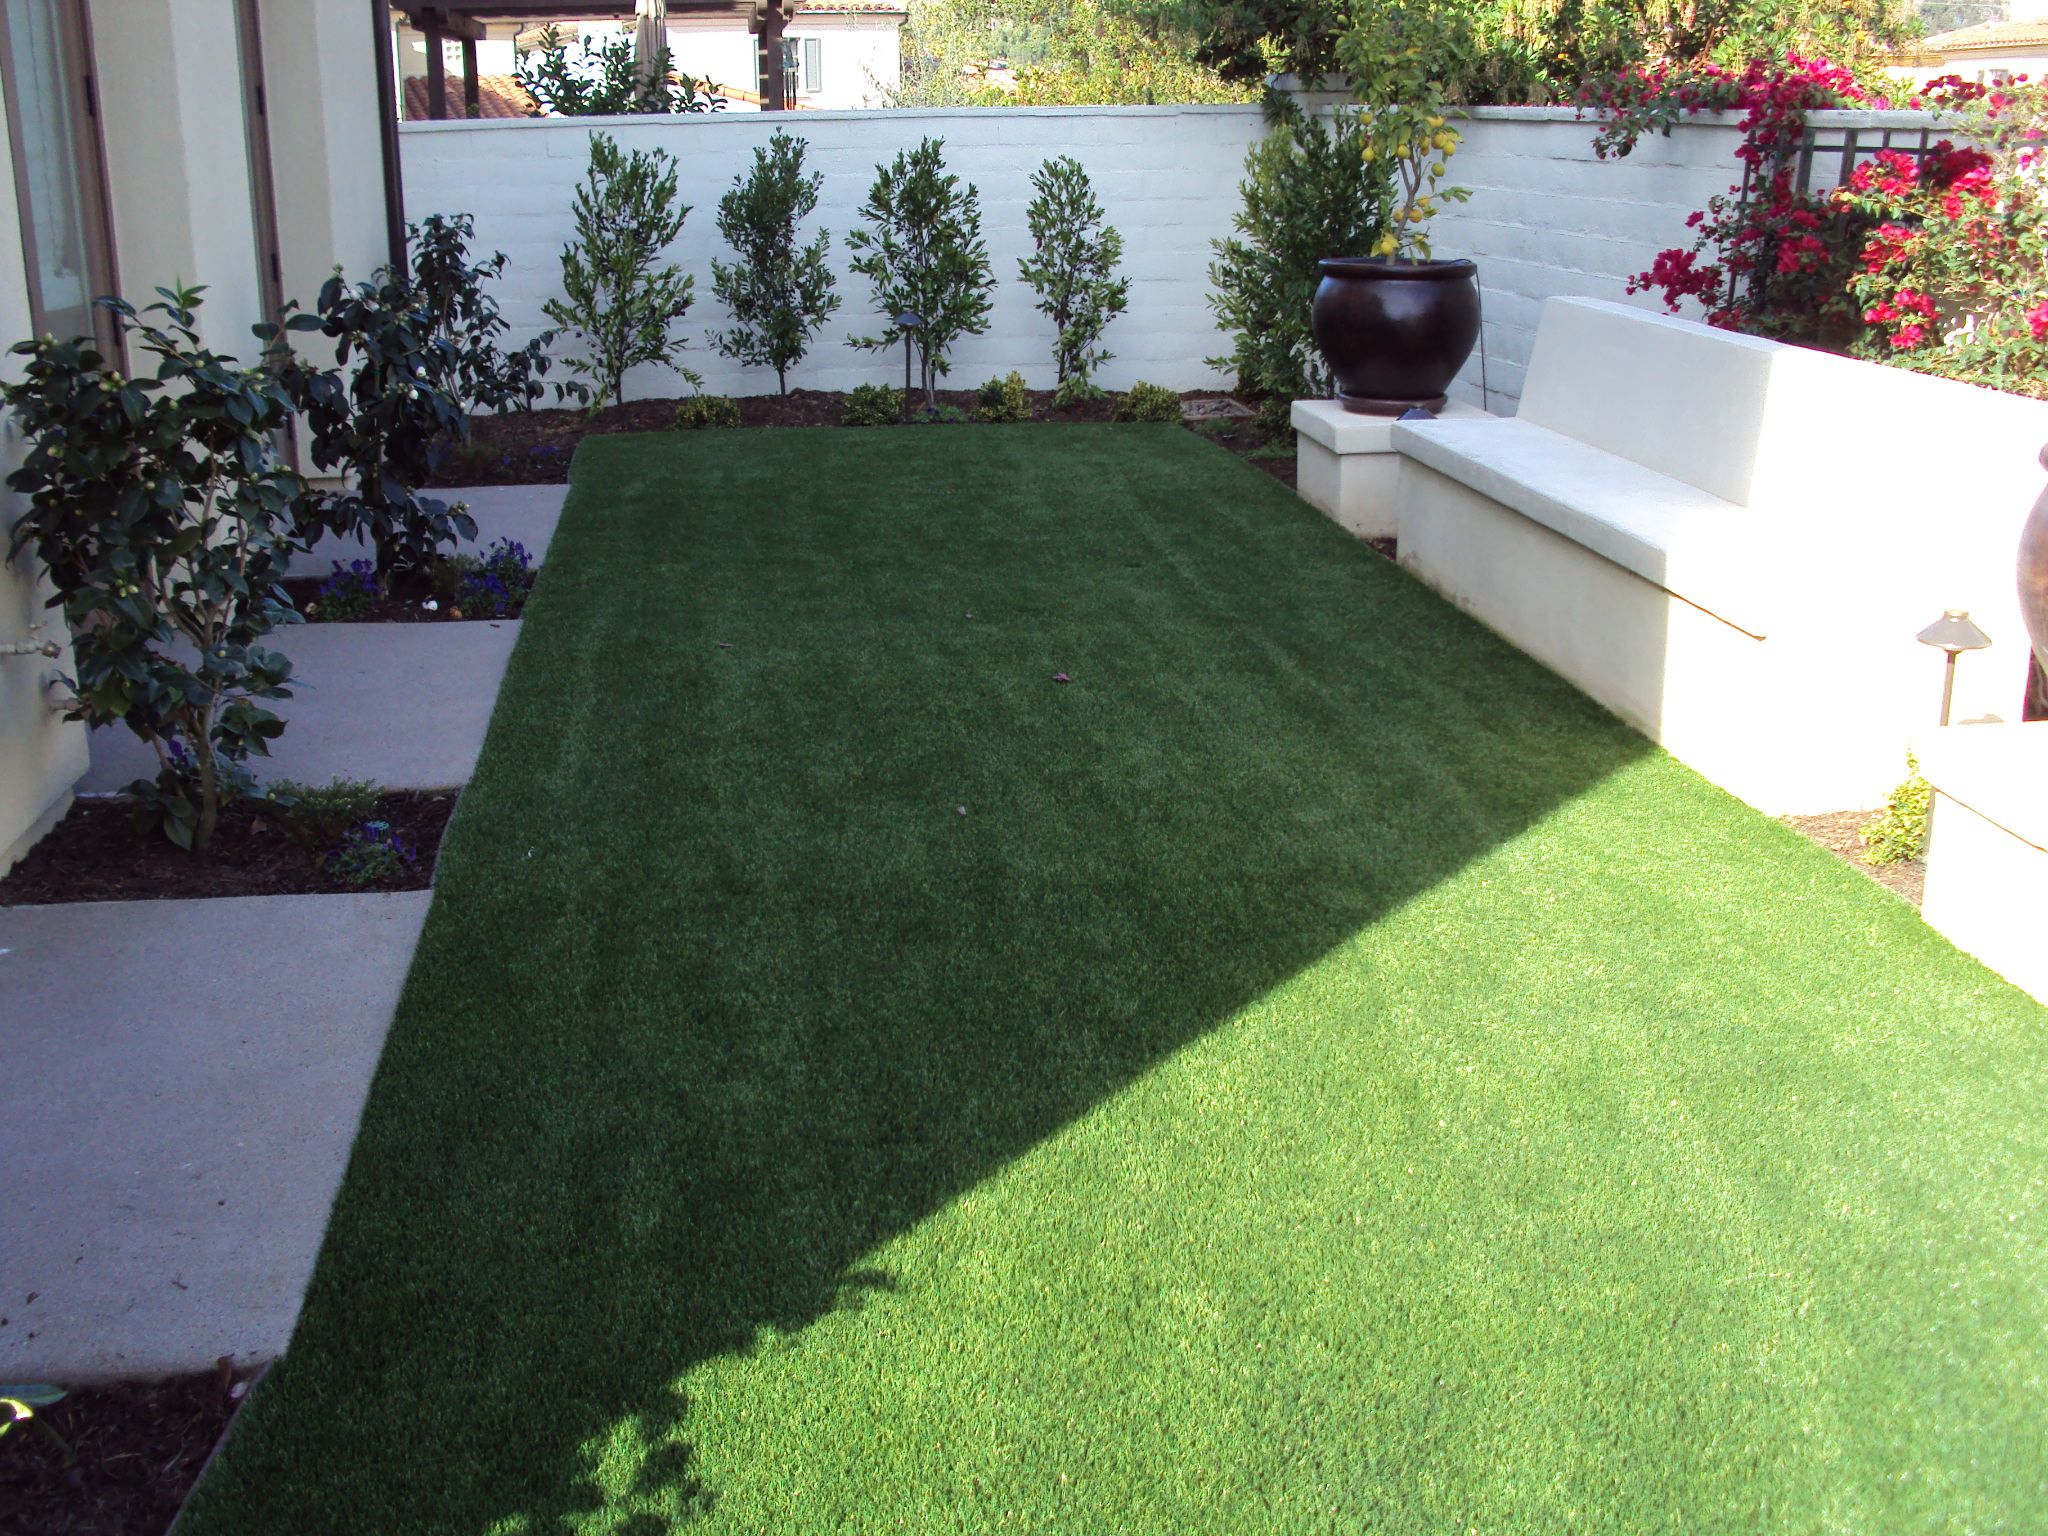 How to Choose the Best Artificial Grass For Your Outdoor